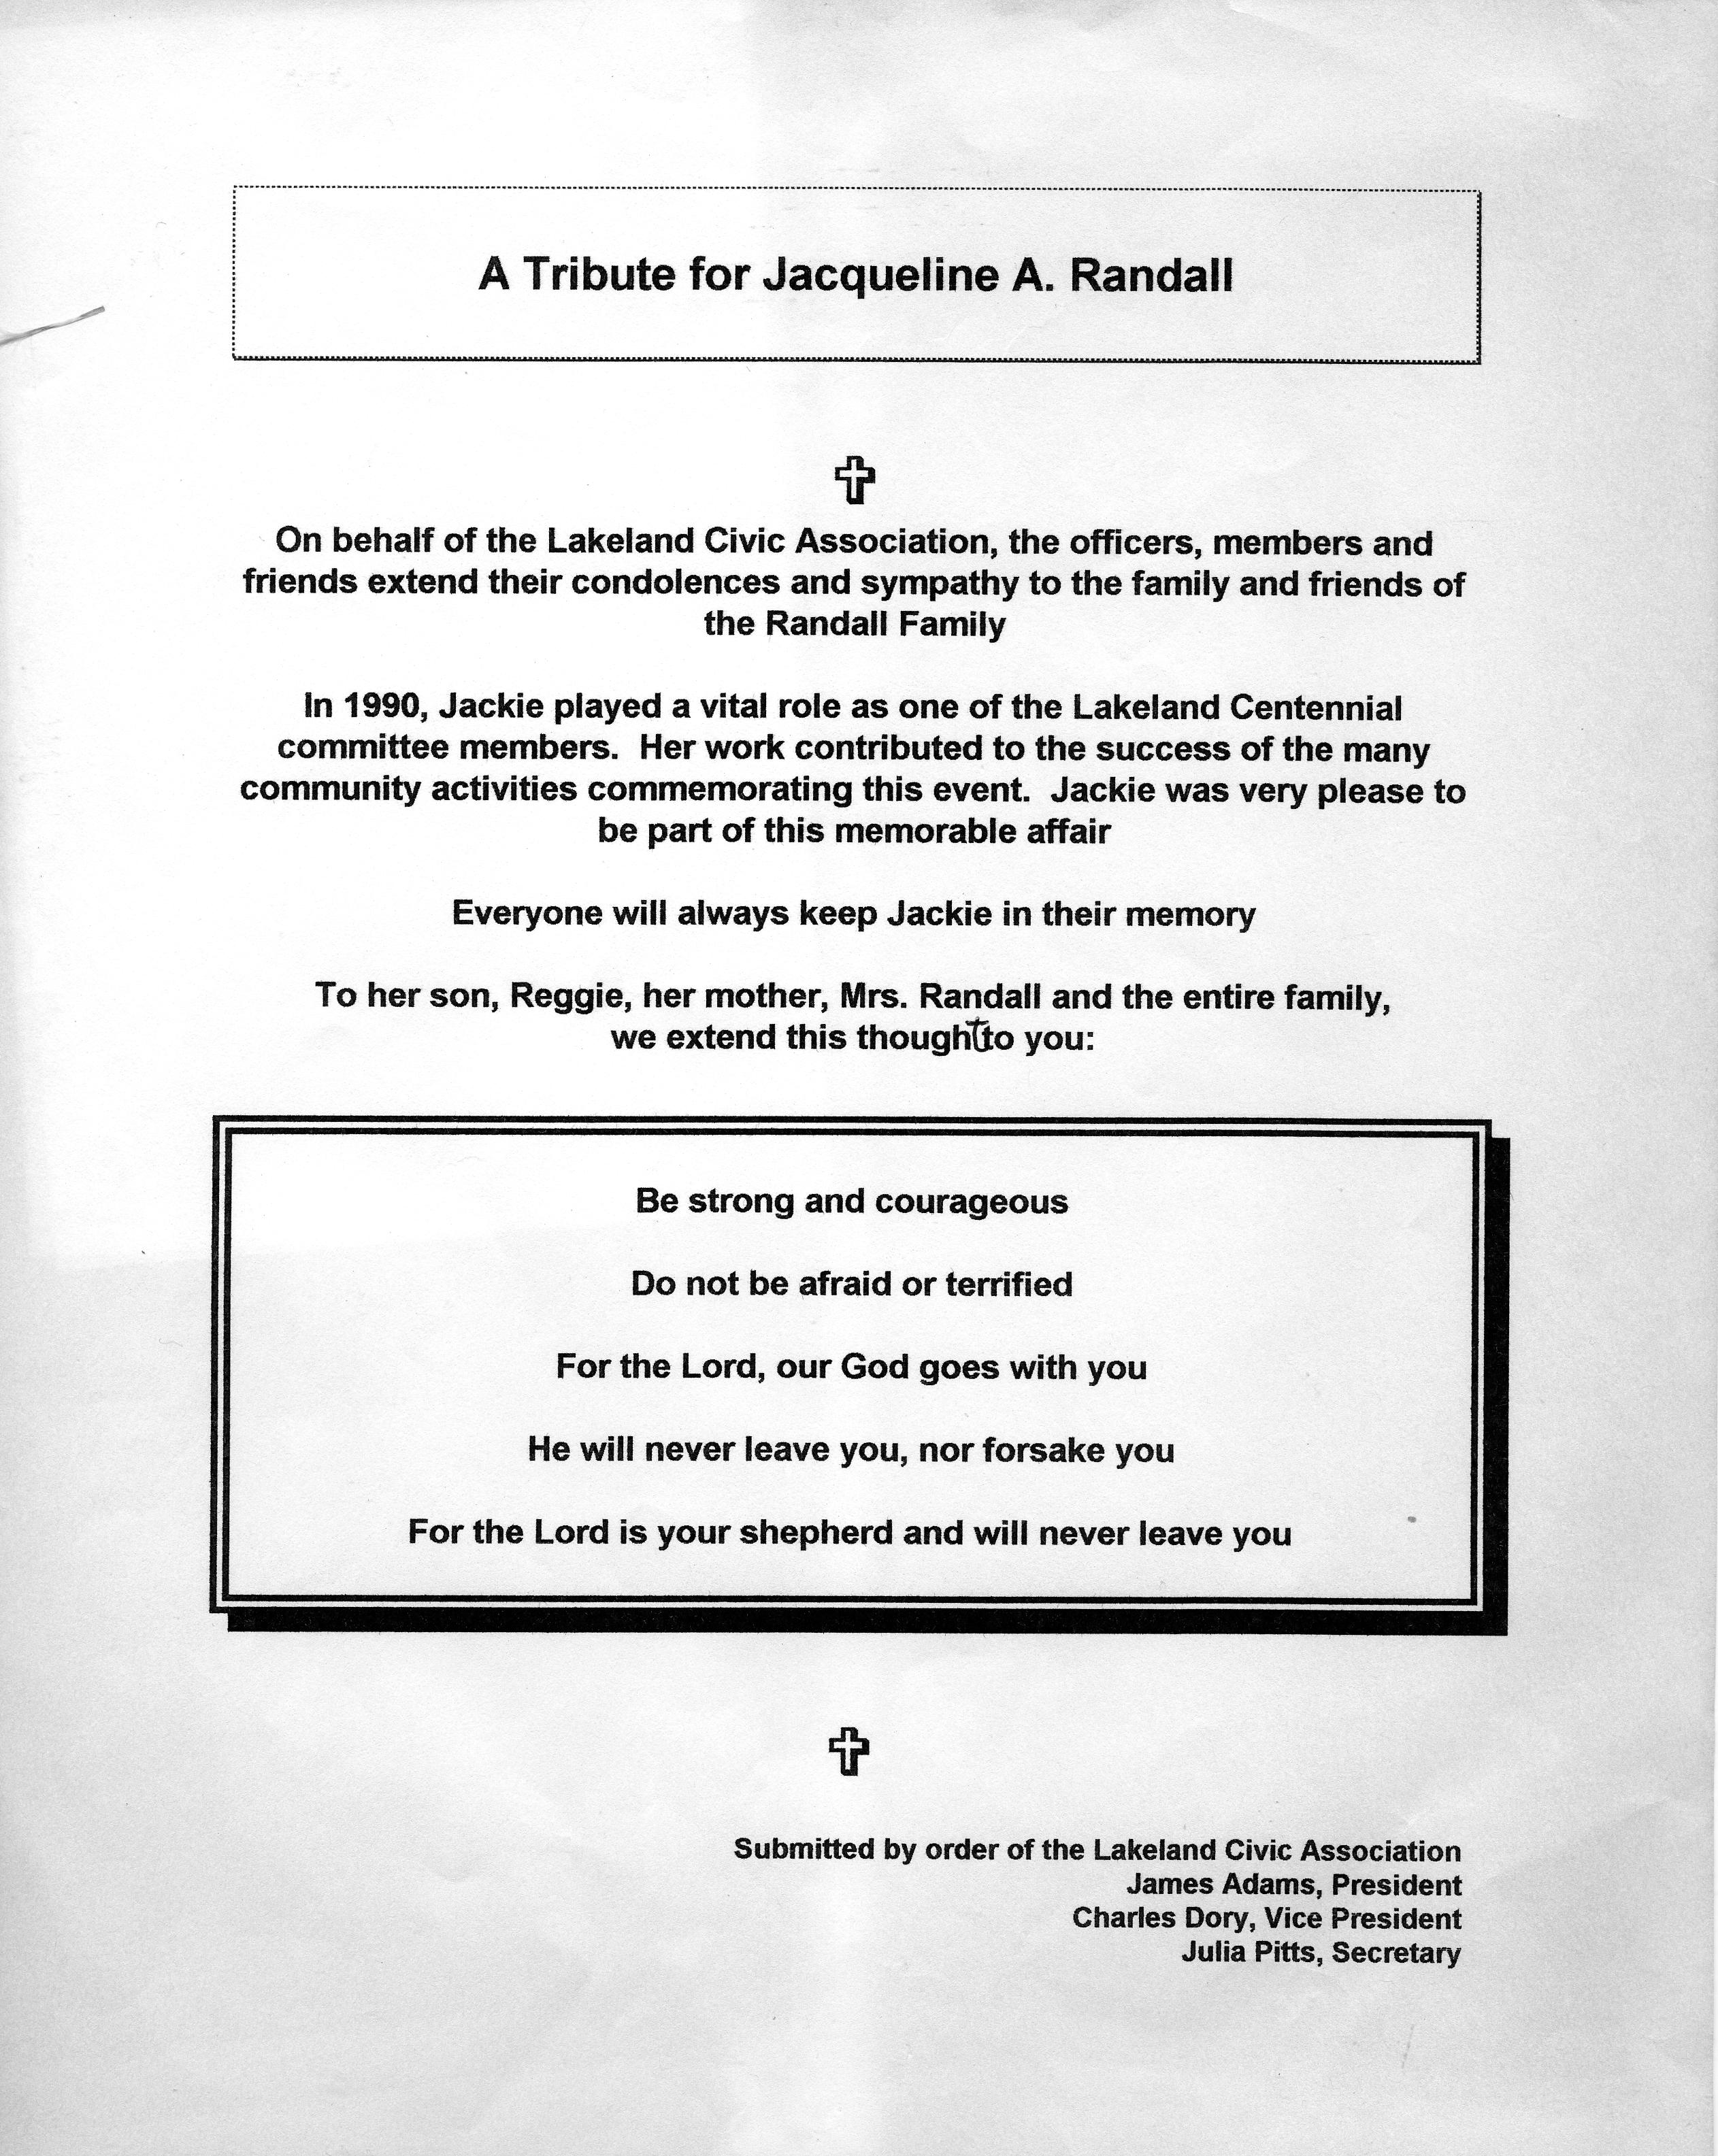 Tribute to Jacqueline A. Randall